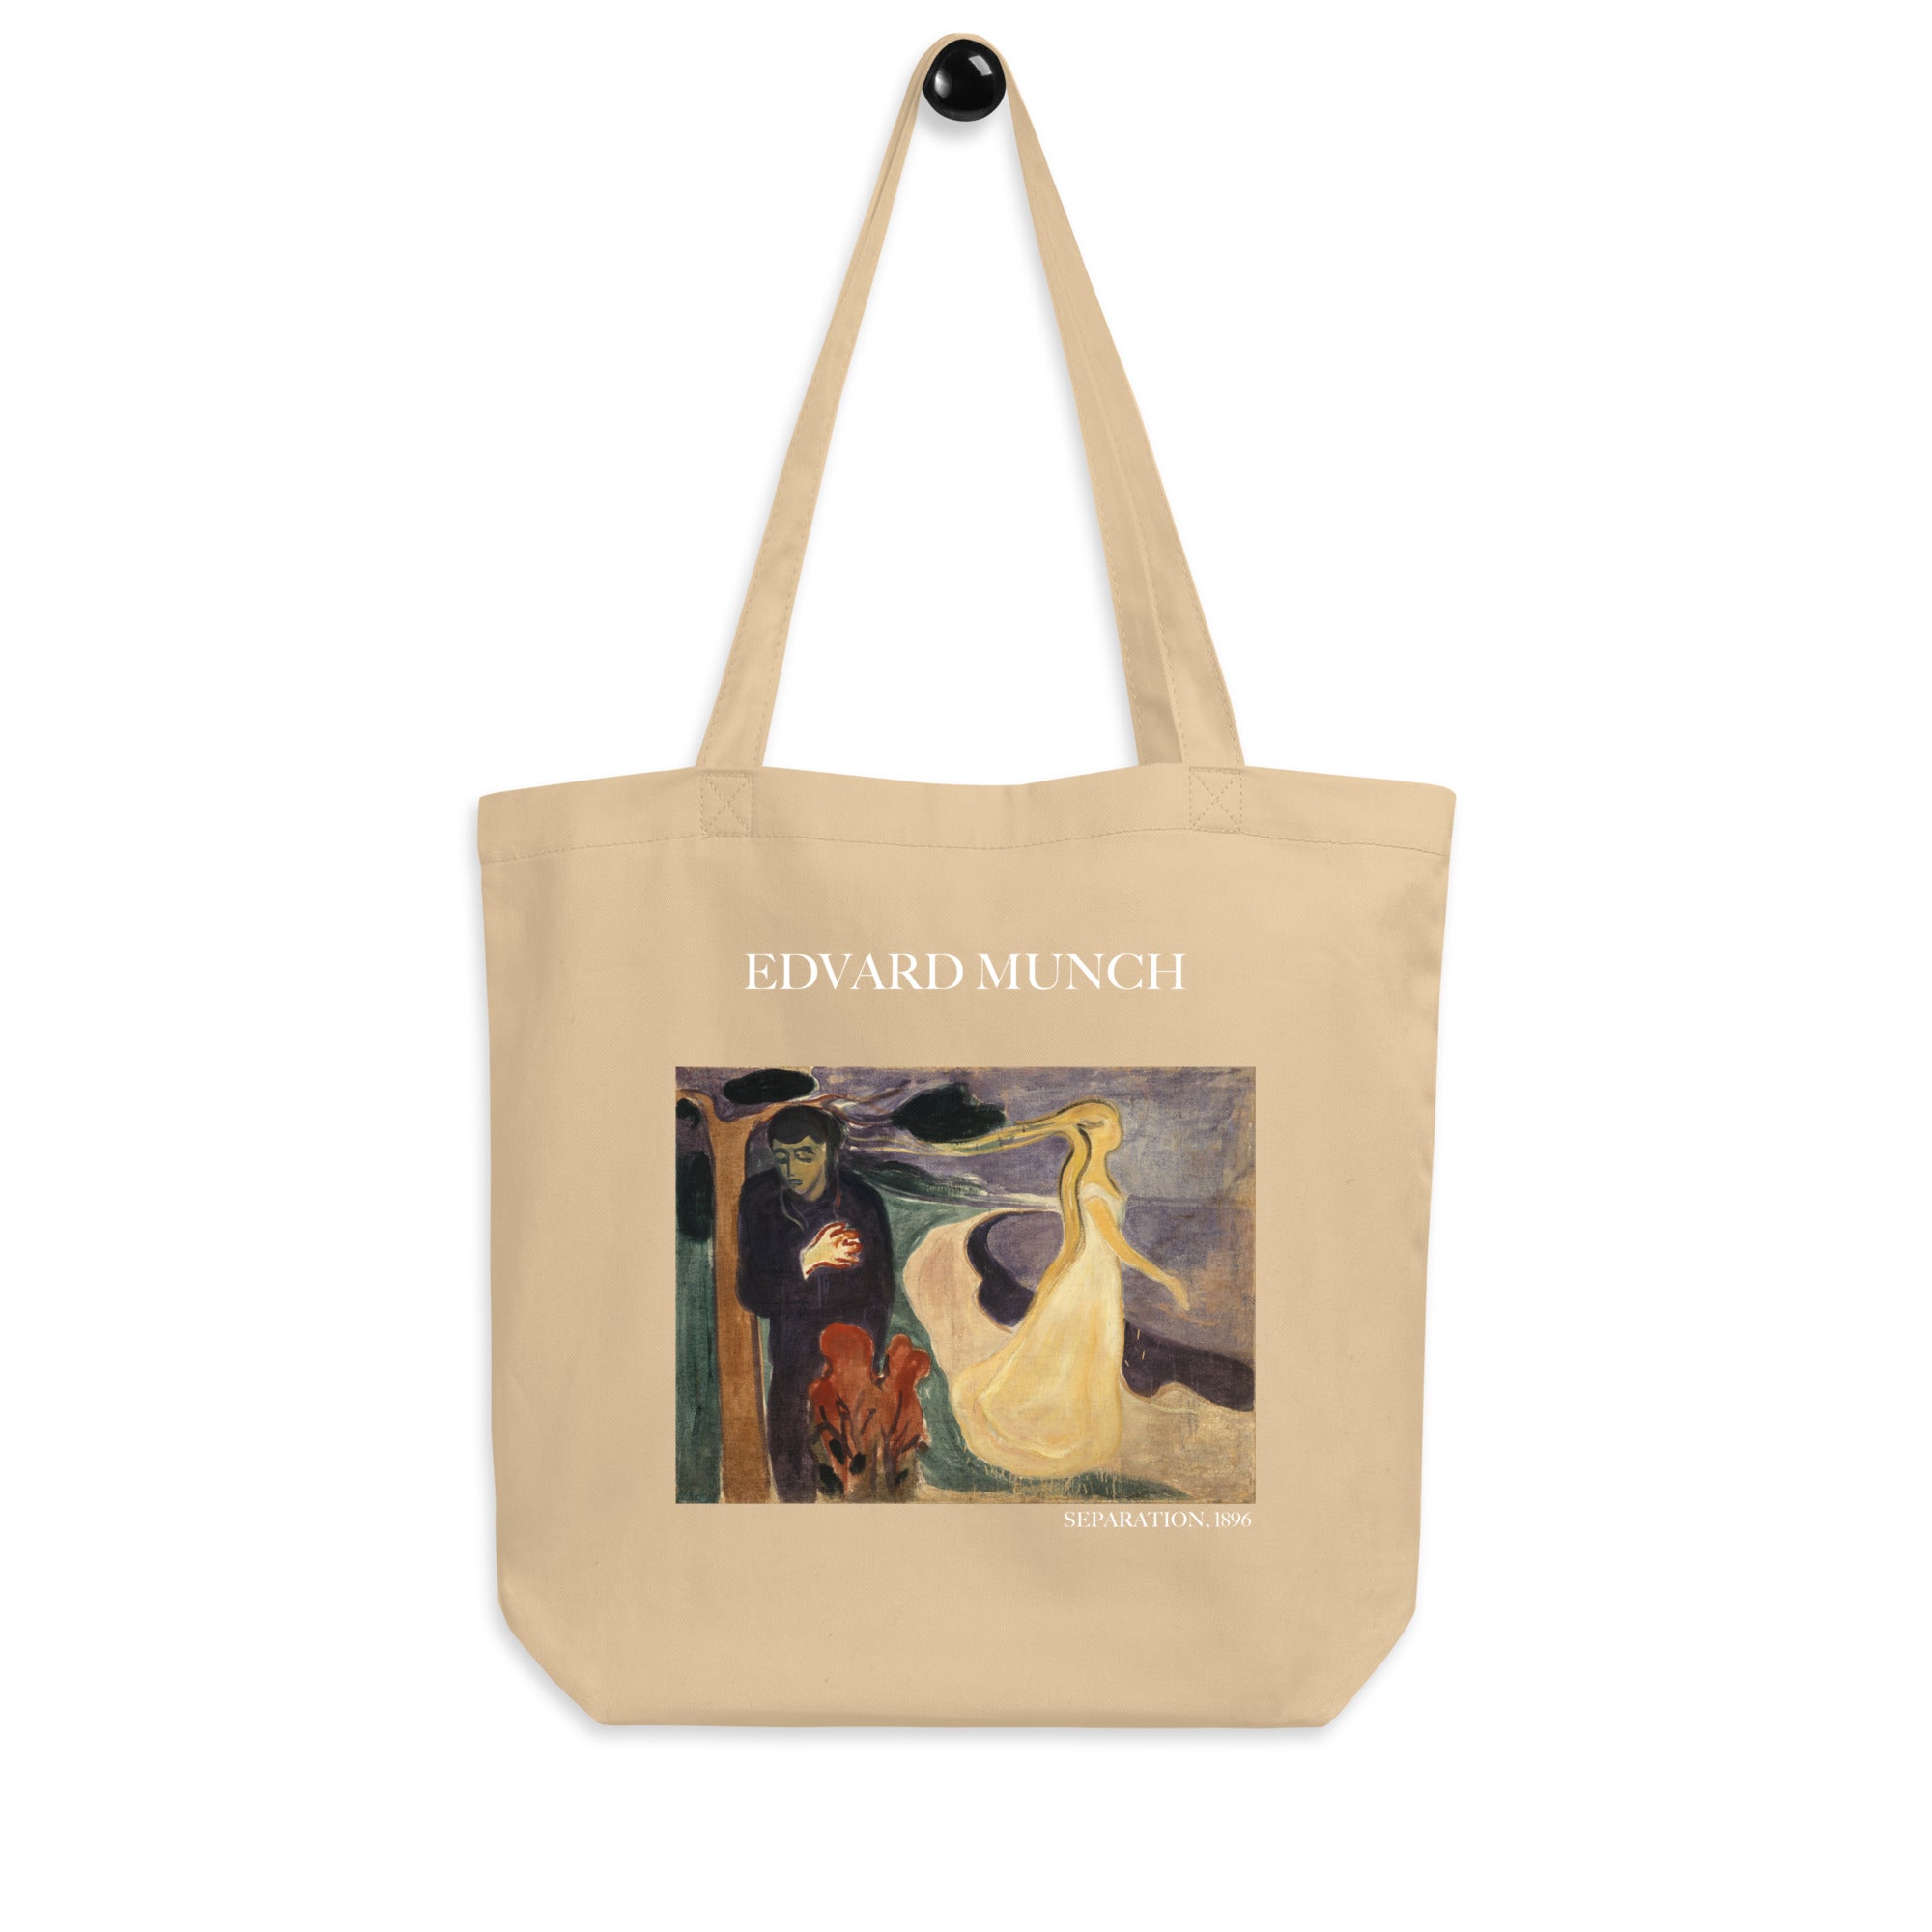 Edvard Munch 'Separation' Famous Painting Totebag | Eco Friendly Art Tote Bag